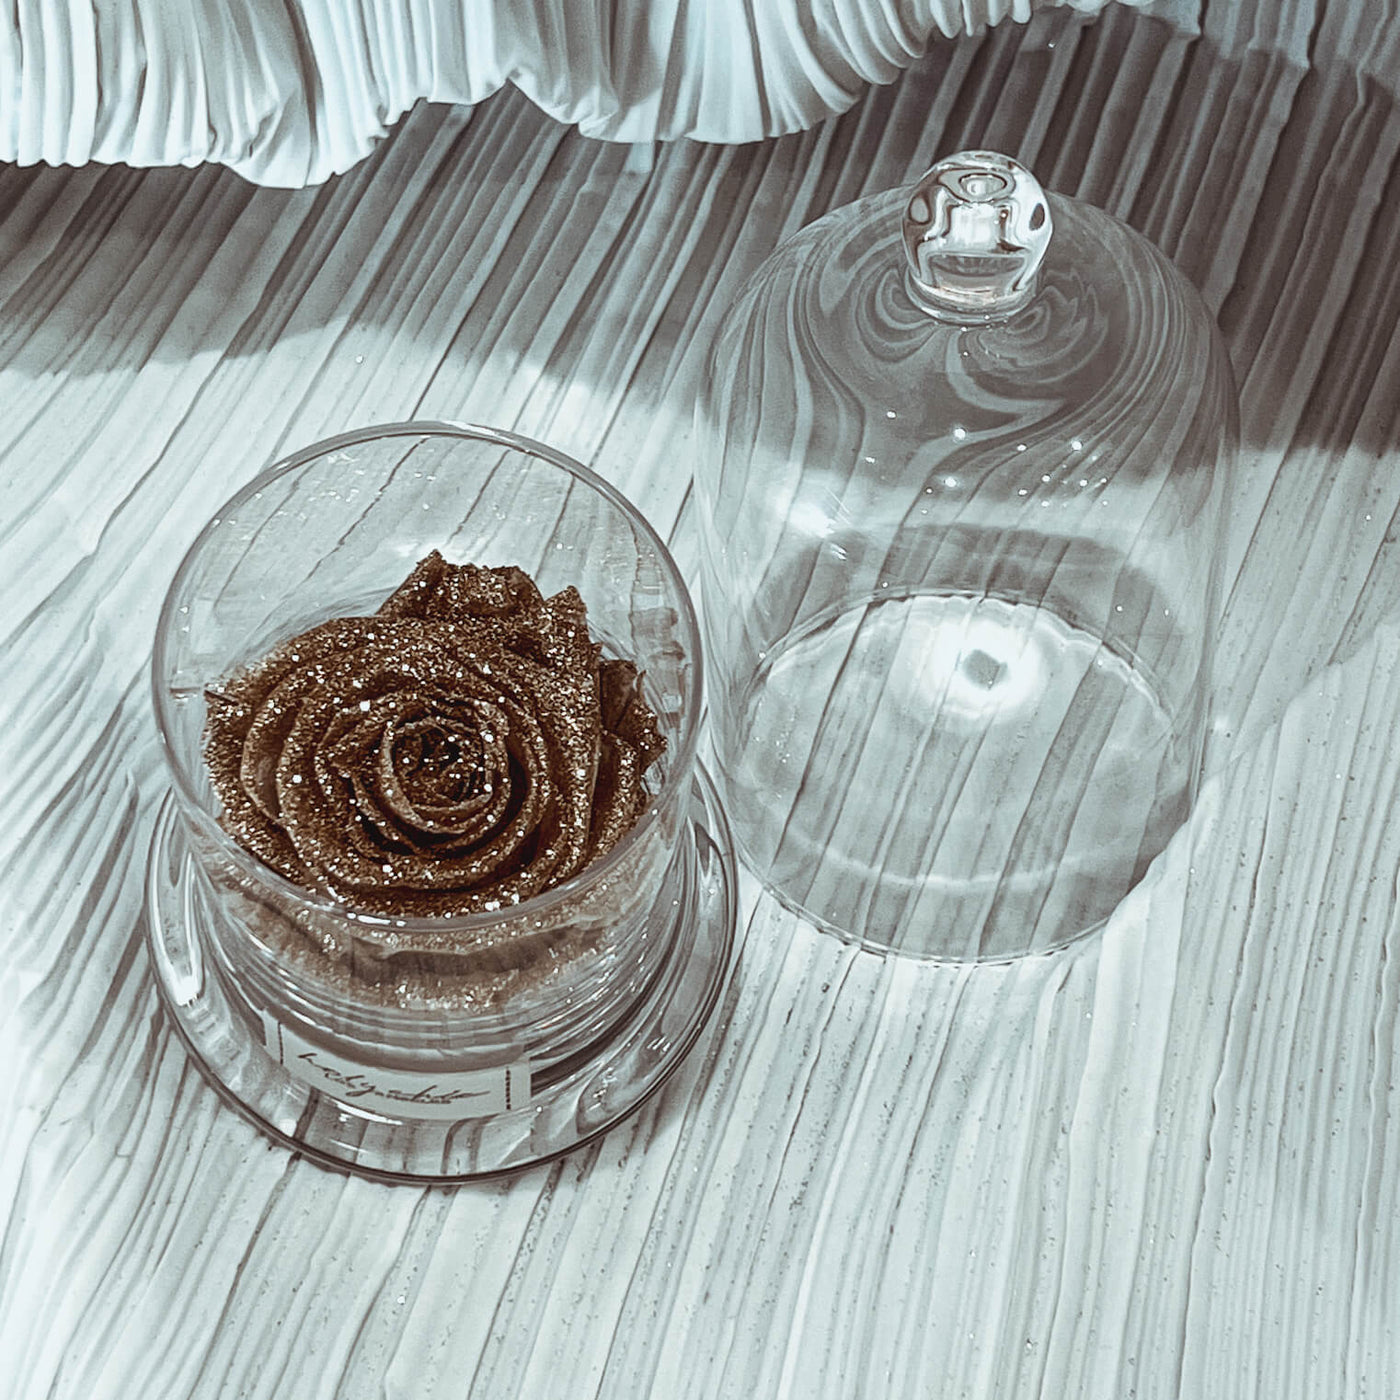 Sparkling forever rose in a clear glass dome